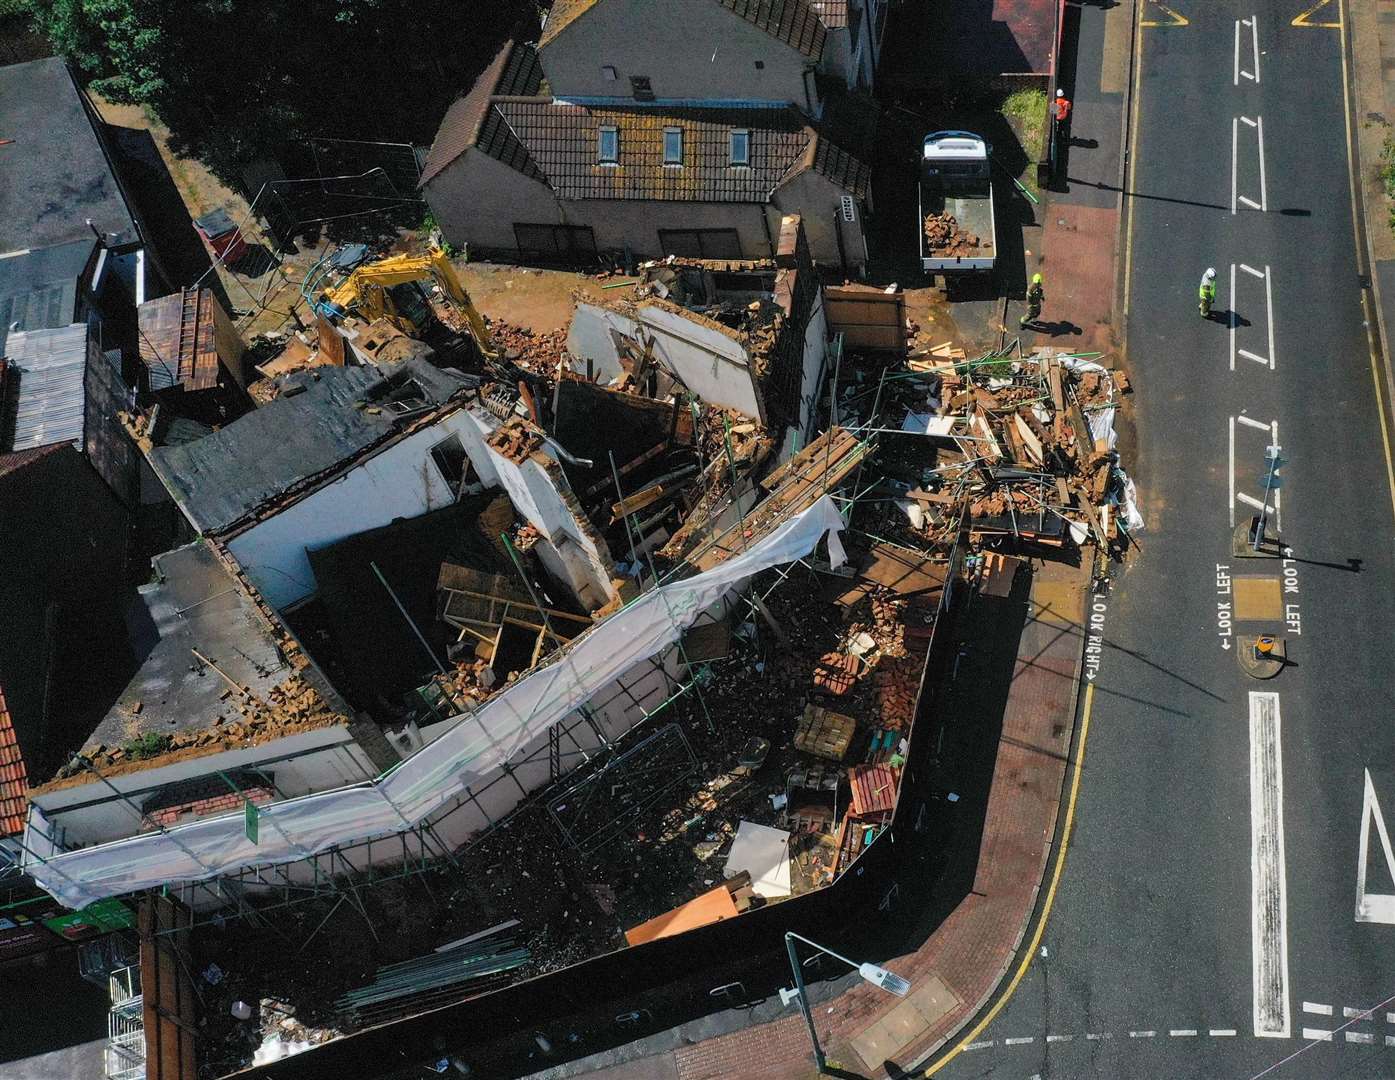 The aftermath of the building collapse in Welling. Image from UKNIP